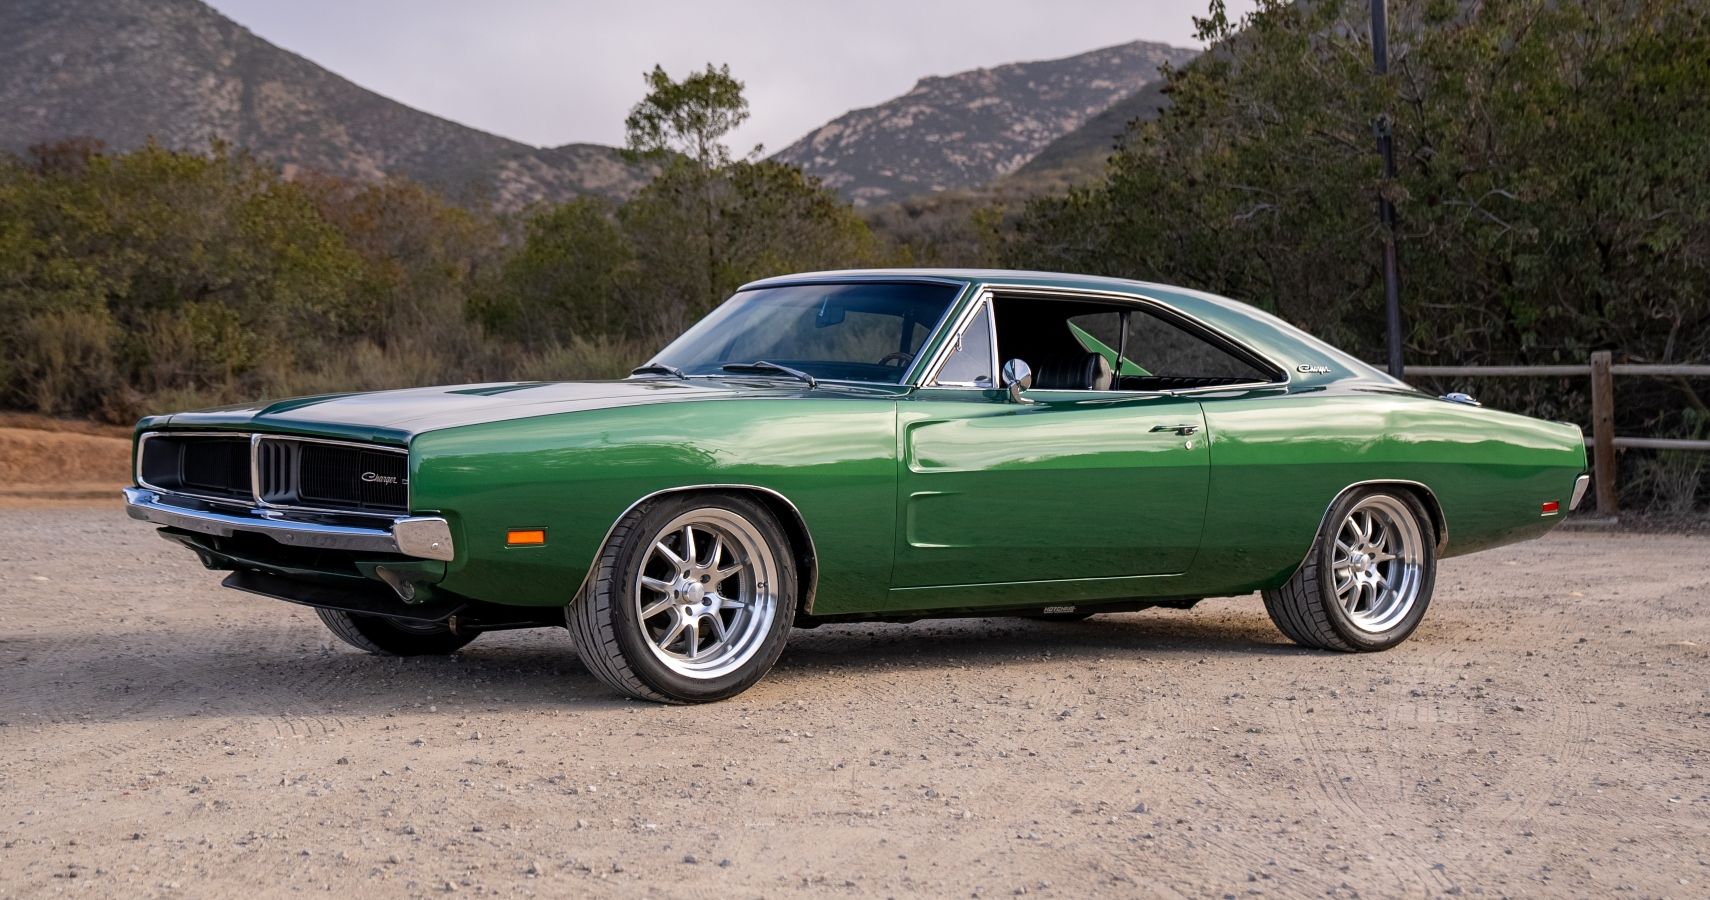 Green 1969 Dodge Charger RestoMods With Mountains Behind